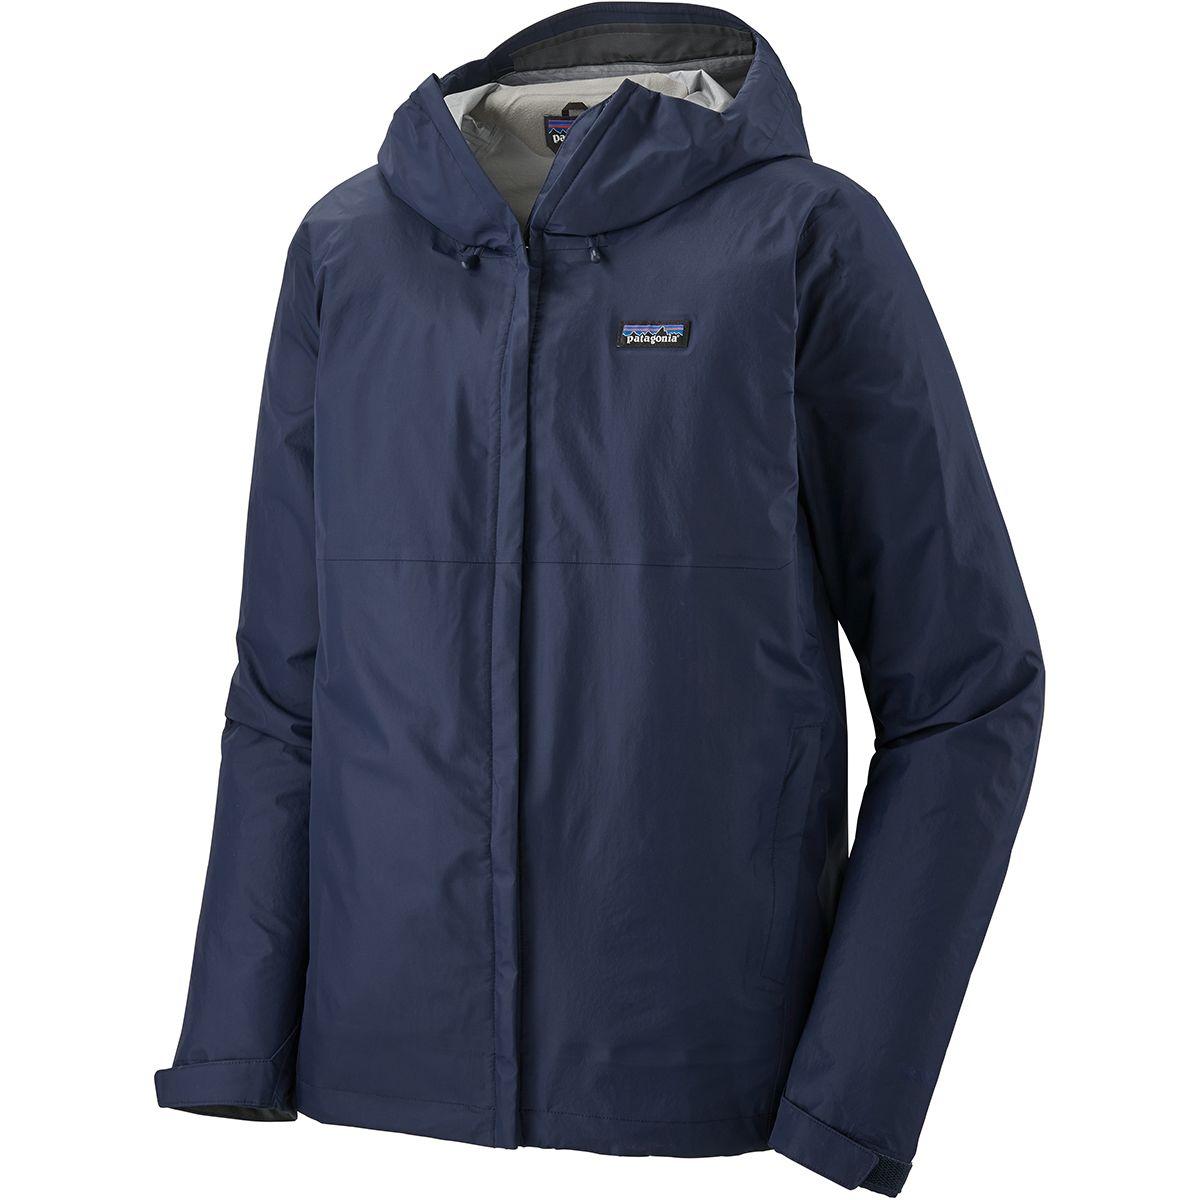 Patagonia Synthetic Torrentshell 3l Jacket in Blue for Men - Lyst